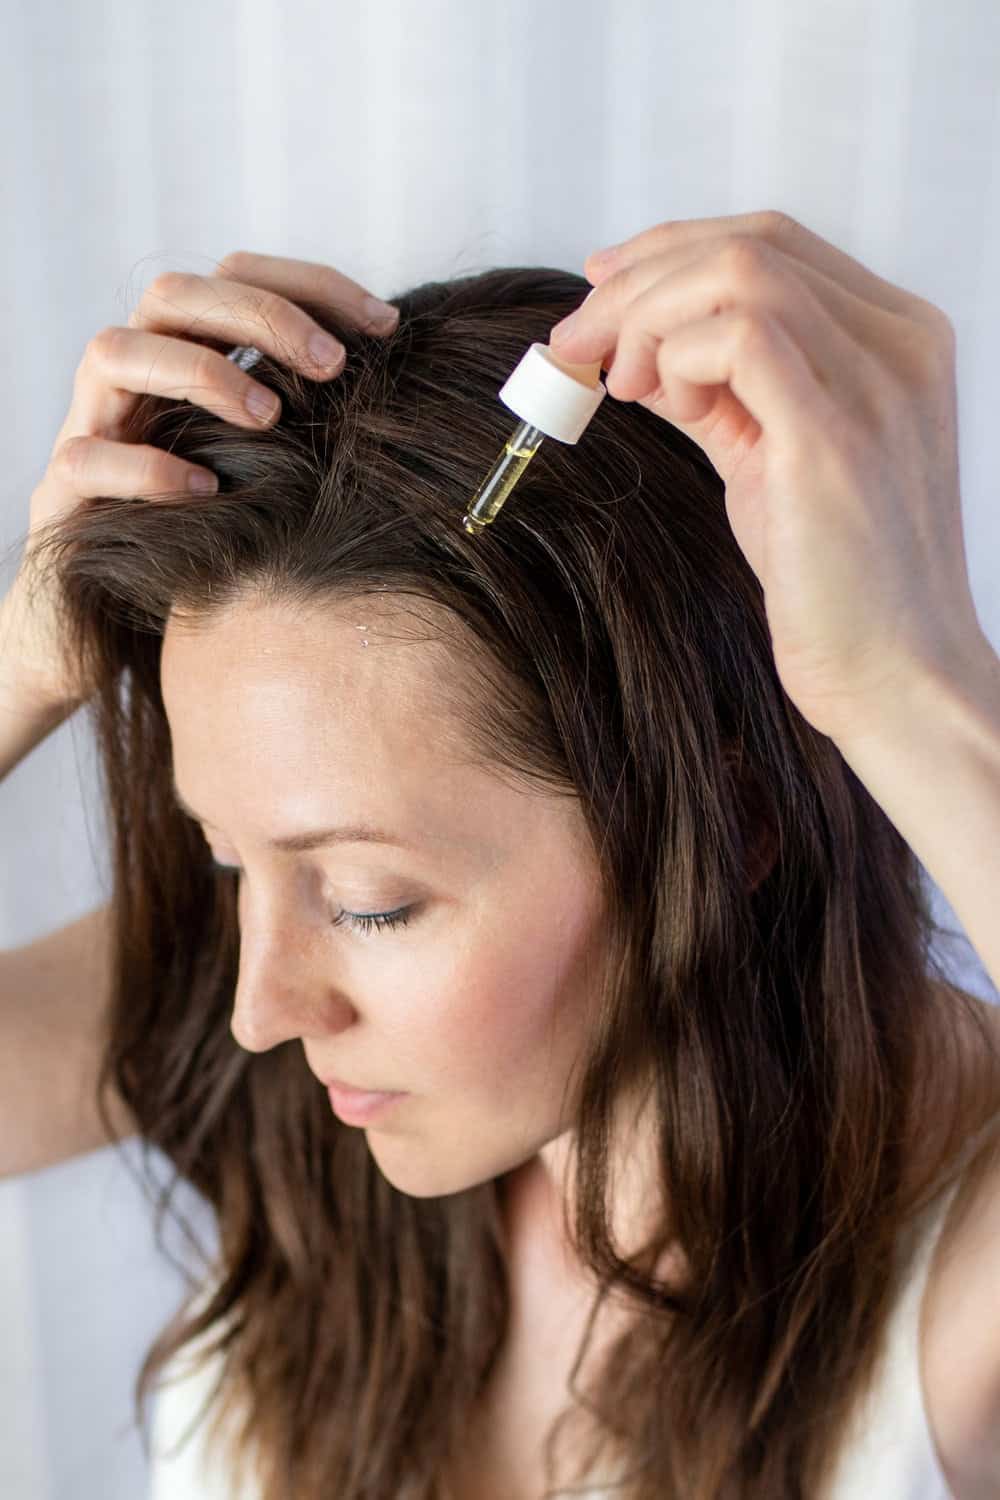 How to make a scalp oil with essential oils